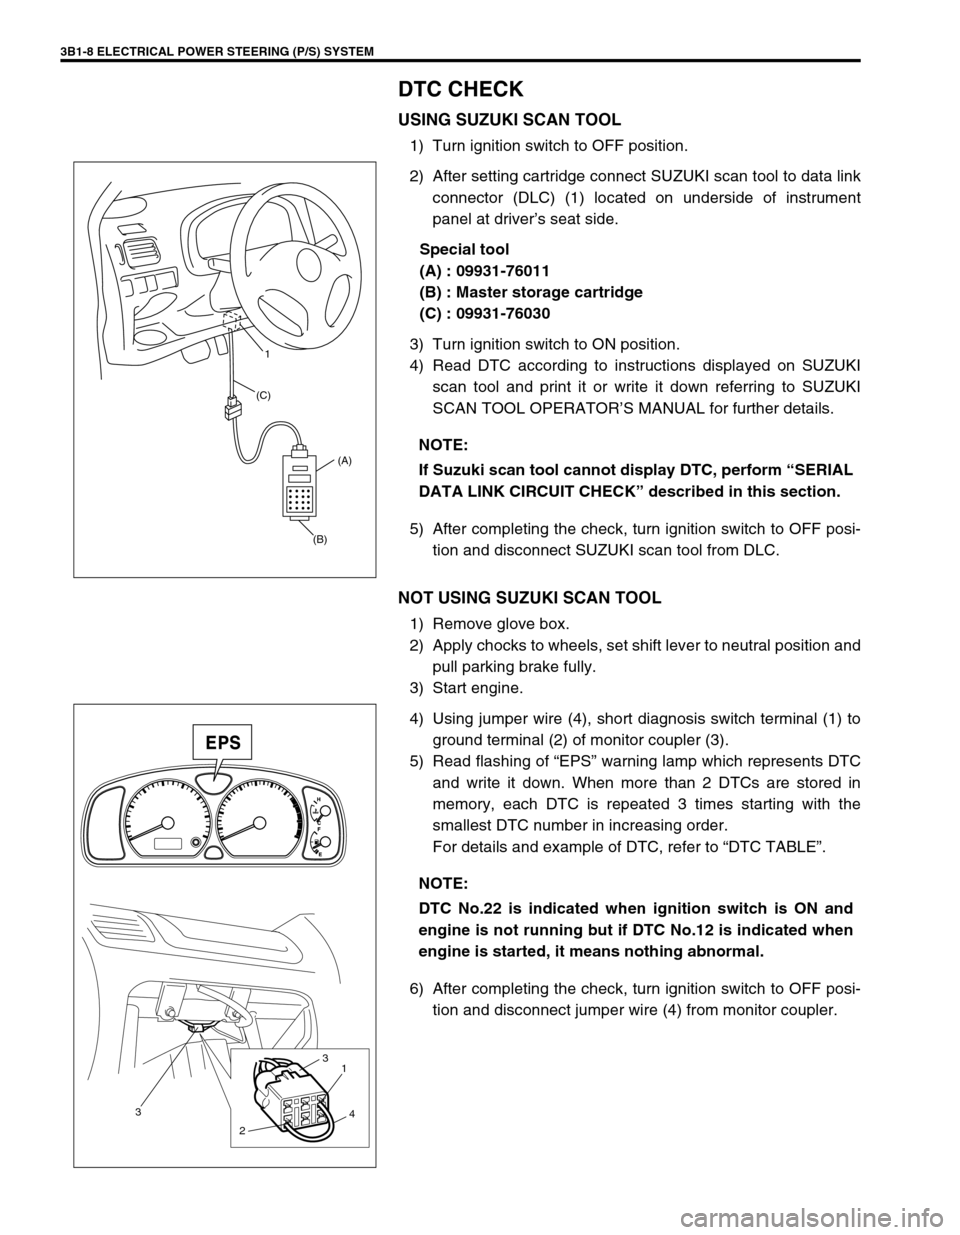 SUZUKI SWIFT 2000 1.G RG413 Service Workshop Manual 3B1-8 ELECTRICAL POWER STEERING (P/S) SYSTEM
DTC CHECK
USING SUZUKI SCAN TOOL
1) Turn ignition switch to OFF position.
2) After setting cartridge connect SUZUKI scan tool to data link
connector (DLC) 